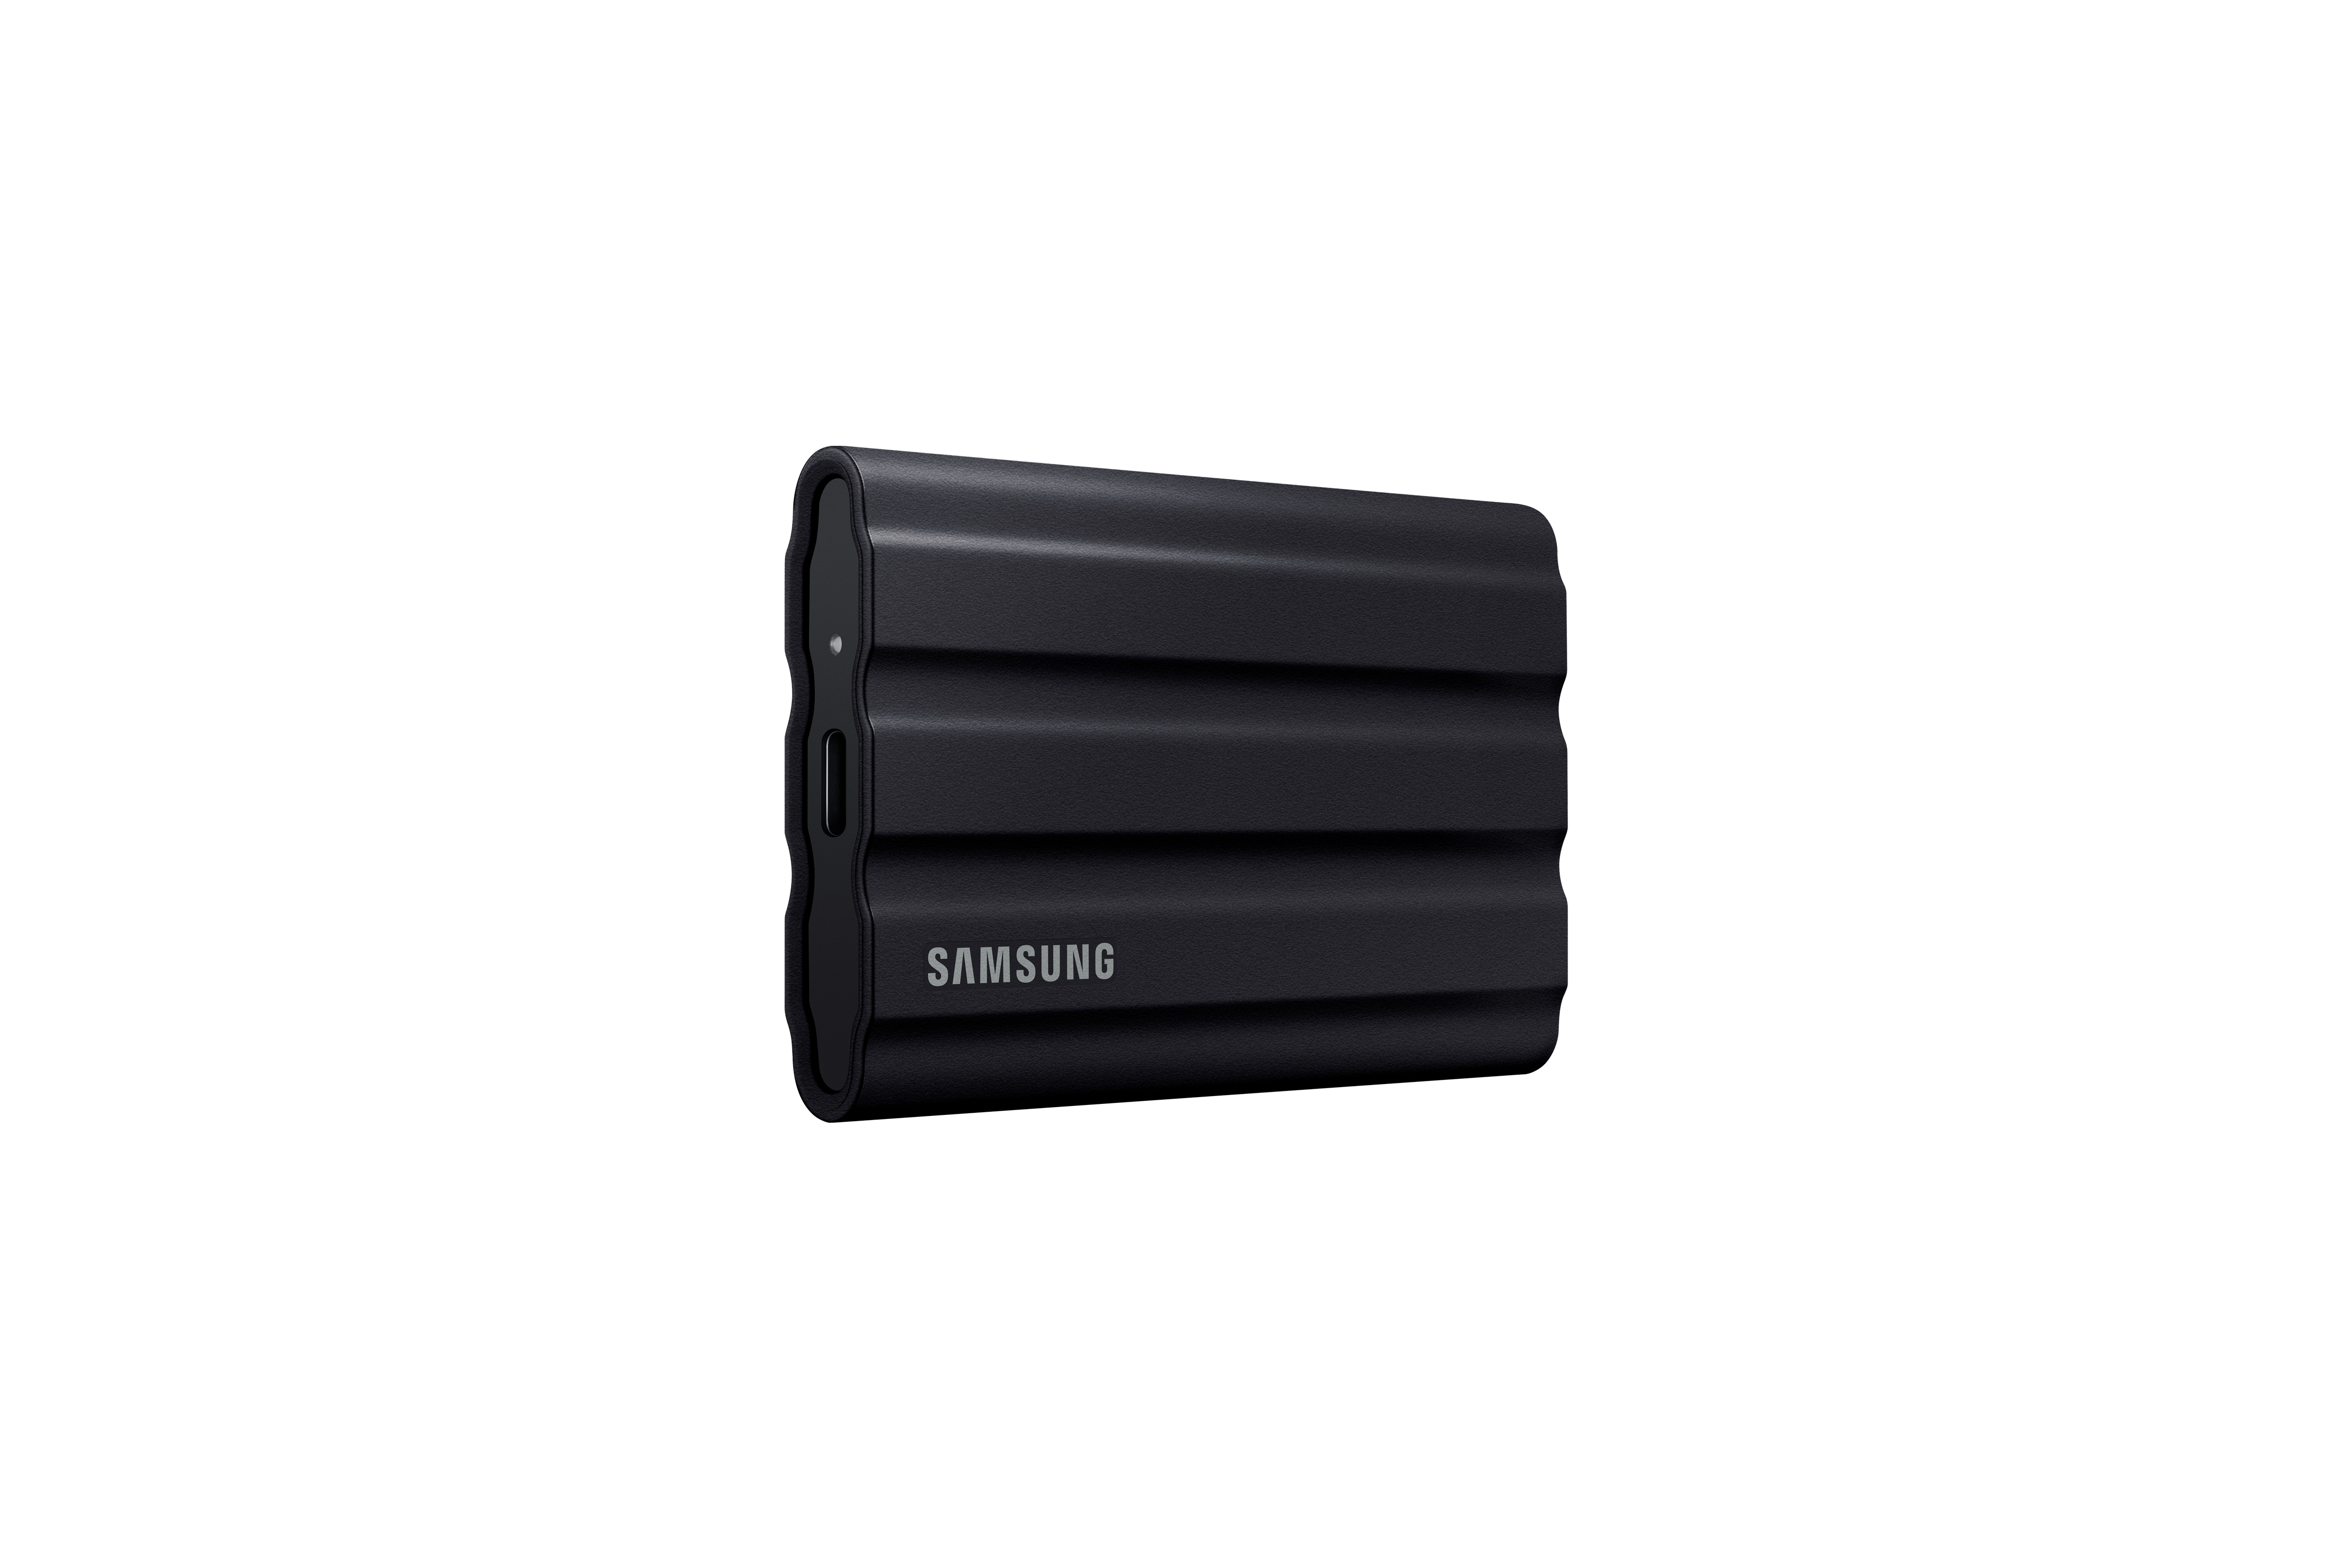 Samsung's Rugged T7 Shield Portable SSD Offers Durability and Fast,  Sustained Performance for Creative Professionals and Consumers On the Go -  Samsung US Newsroom